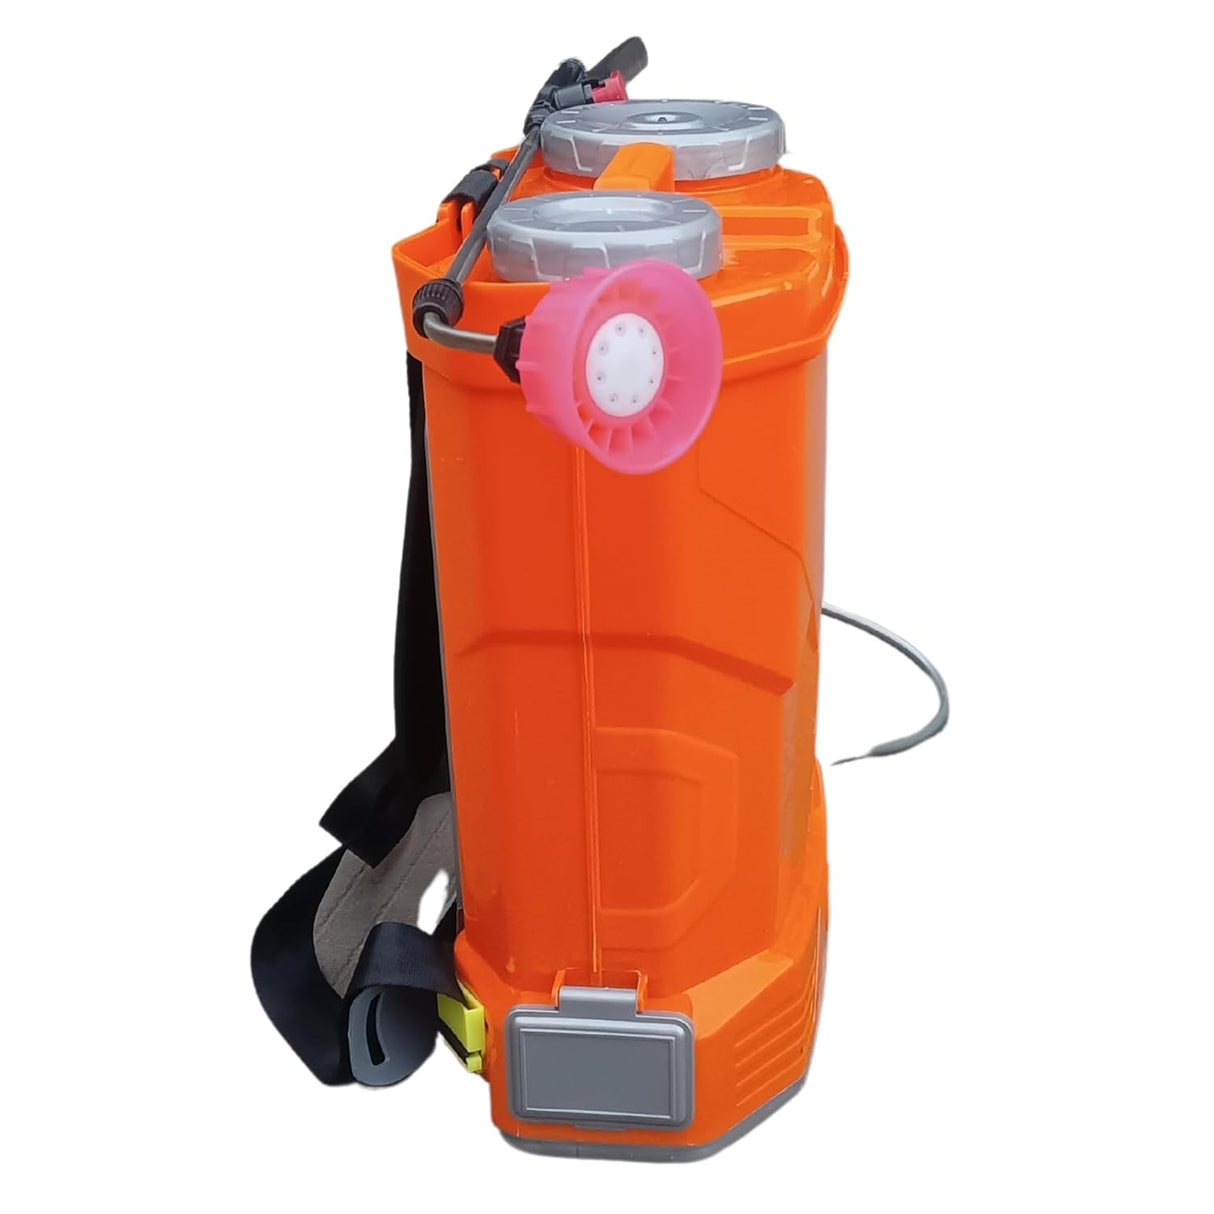 Singhal Double Motor Agriculture Sprayer Pump Battery, 20L Tank Capacity, Battery Operated Pump Backpack Automatic Sprayer, 12V 12Ah Battery